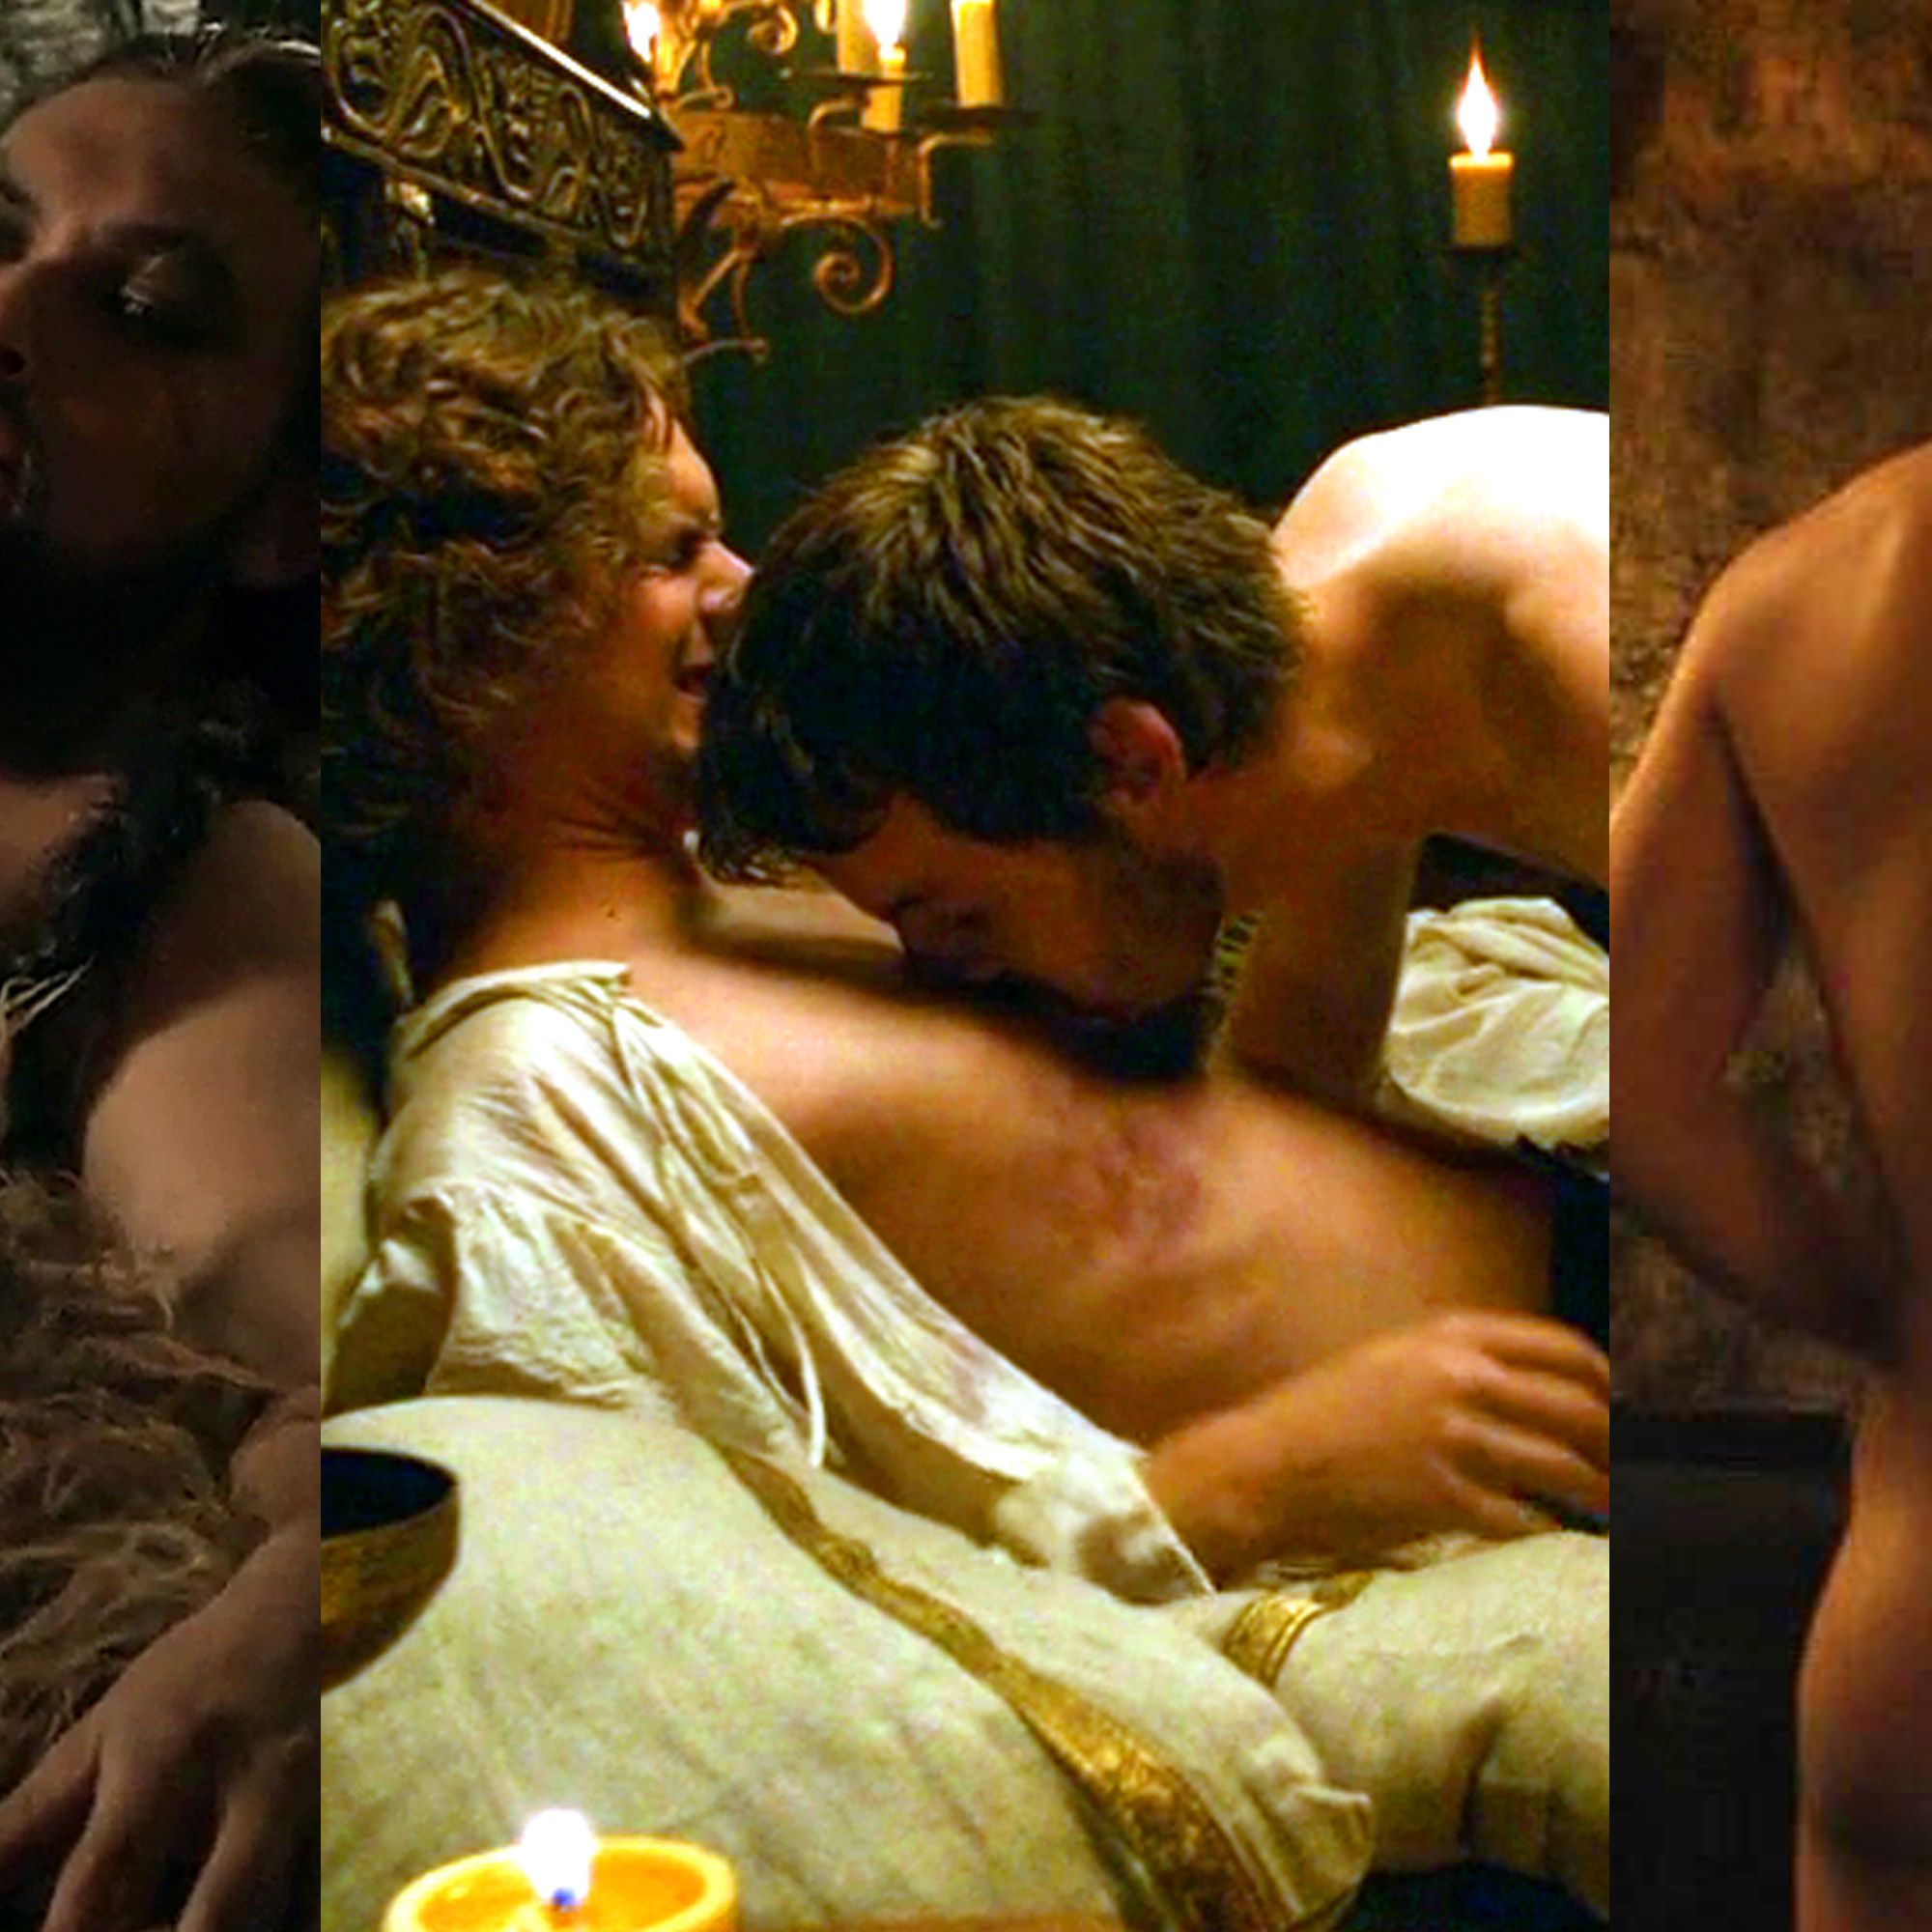 game of thrones gay sex scene